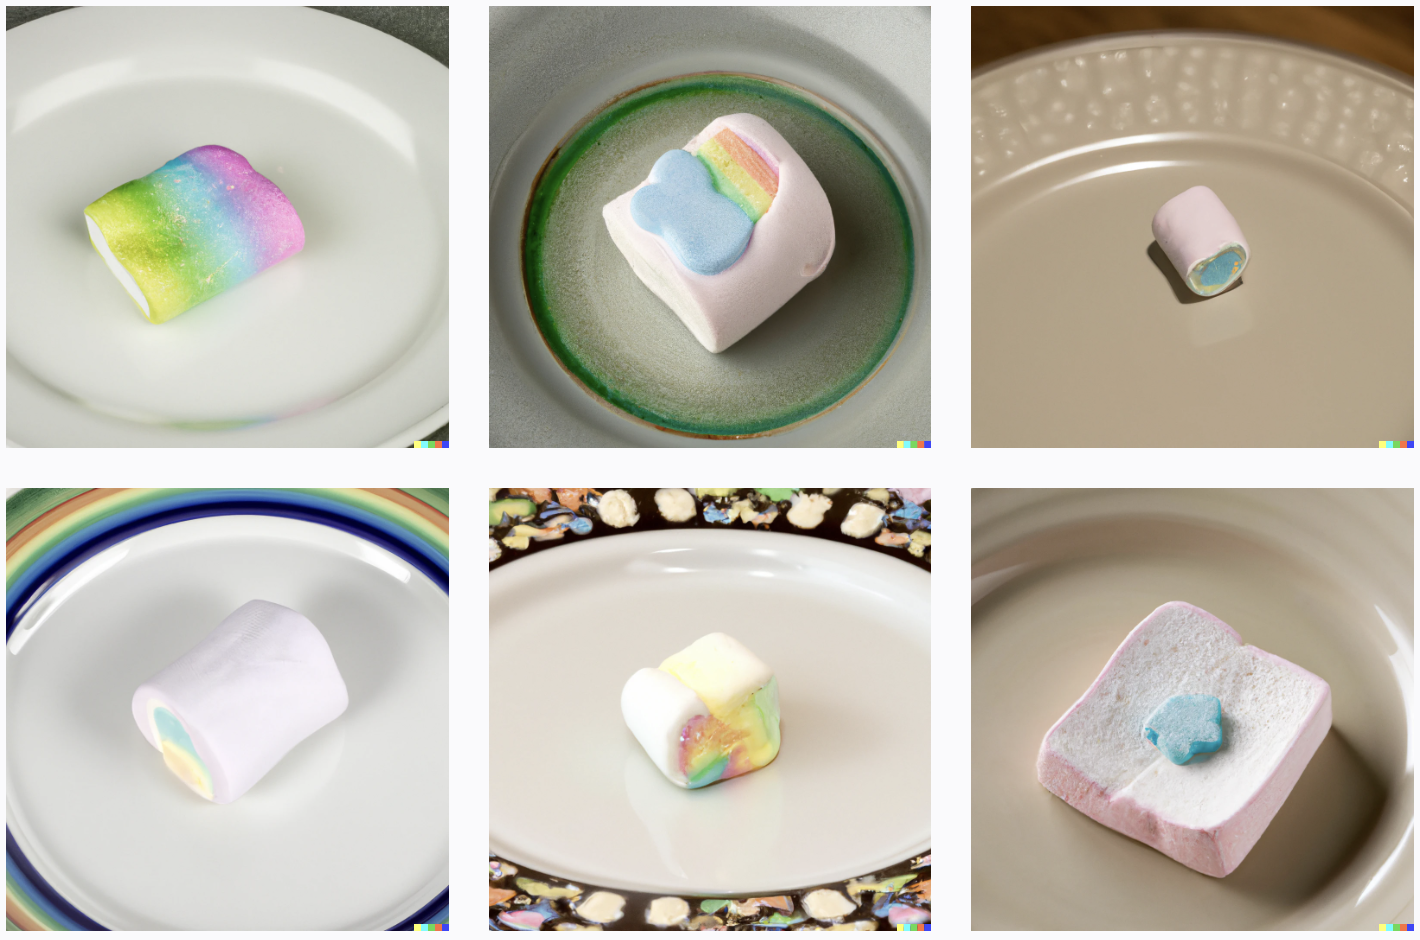 Each plate holds a single colorful marshmallow, some of which have rainbow stripes or swirls. The most interesting marshmallow shape is a star on toast. They're all pretty realistic looking though.